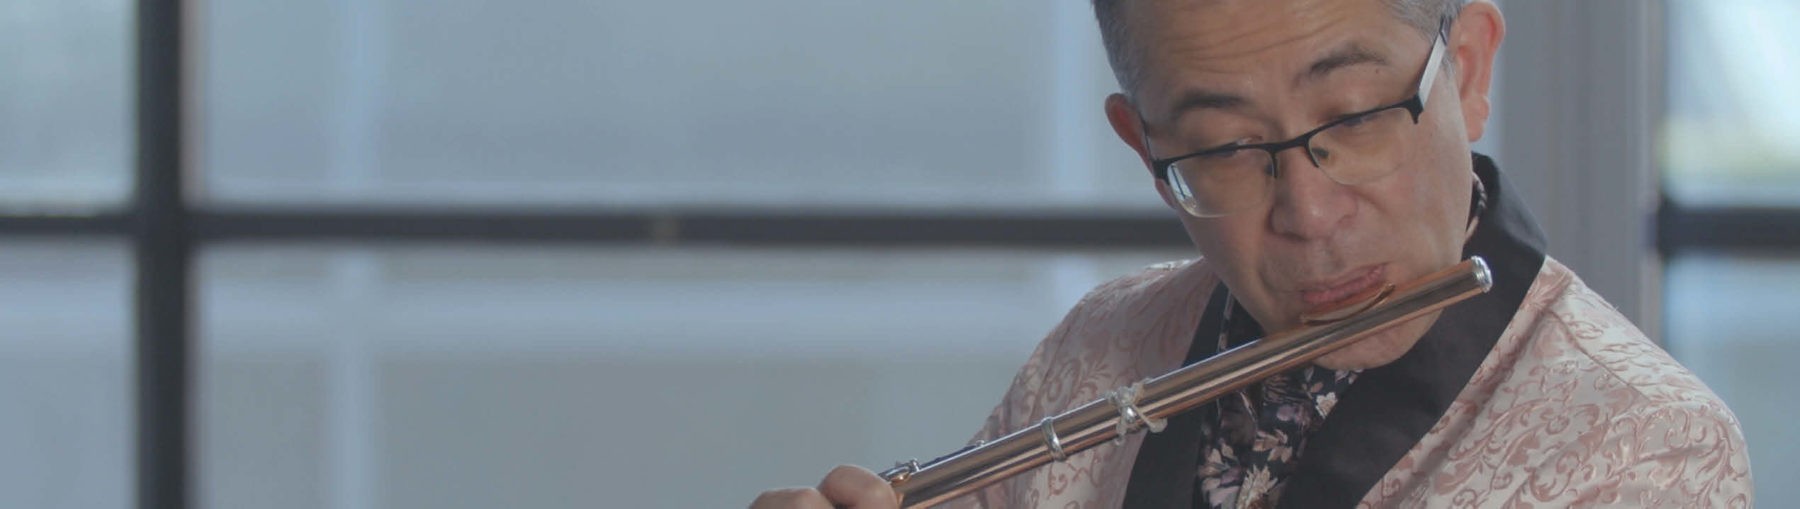 Mark Takeshi McGregor in a paisley pink jacket playing the flute